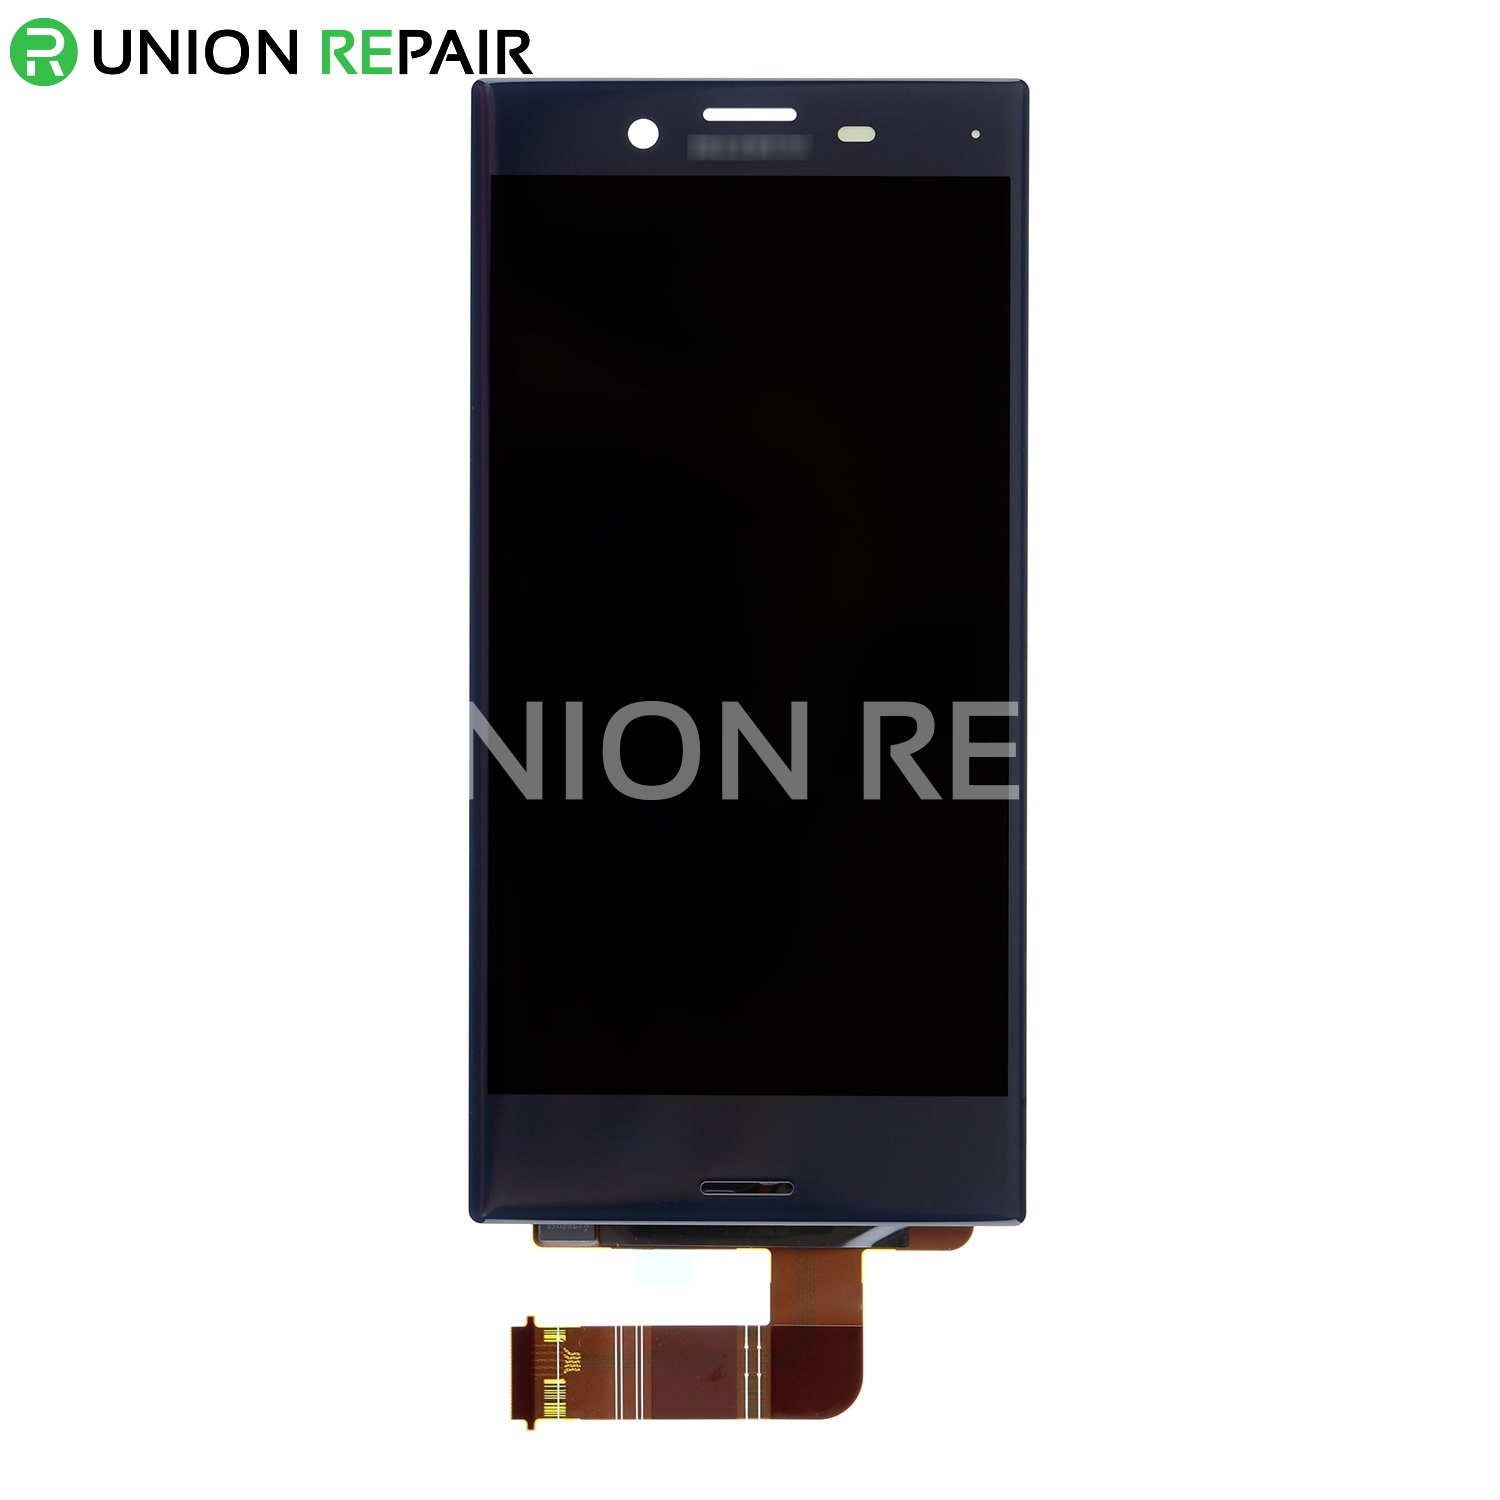 Replacement for Sony Xperia X Compact/Mini LCD Screen with Digitizer Assembly - Black